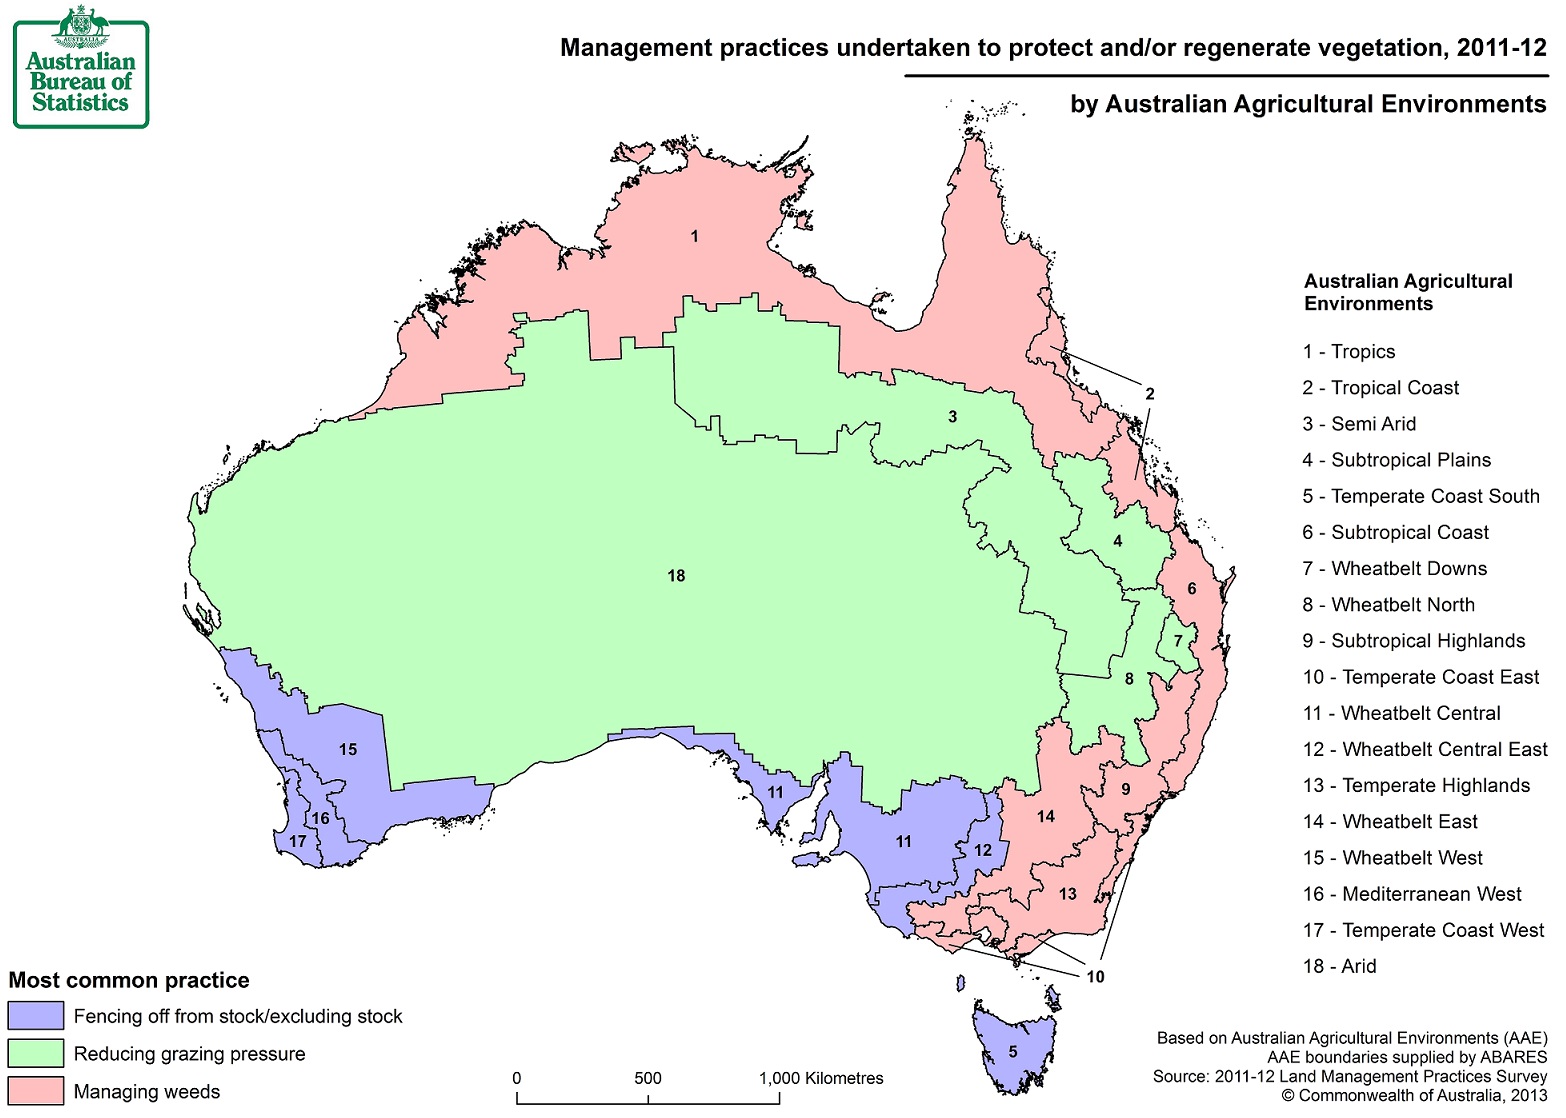 Image: Map of vegetation practices